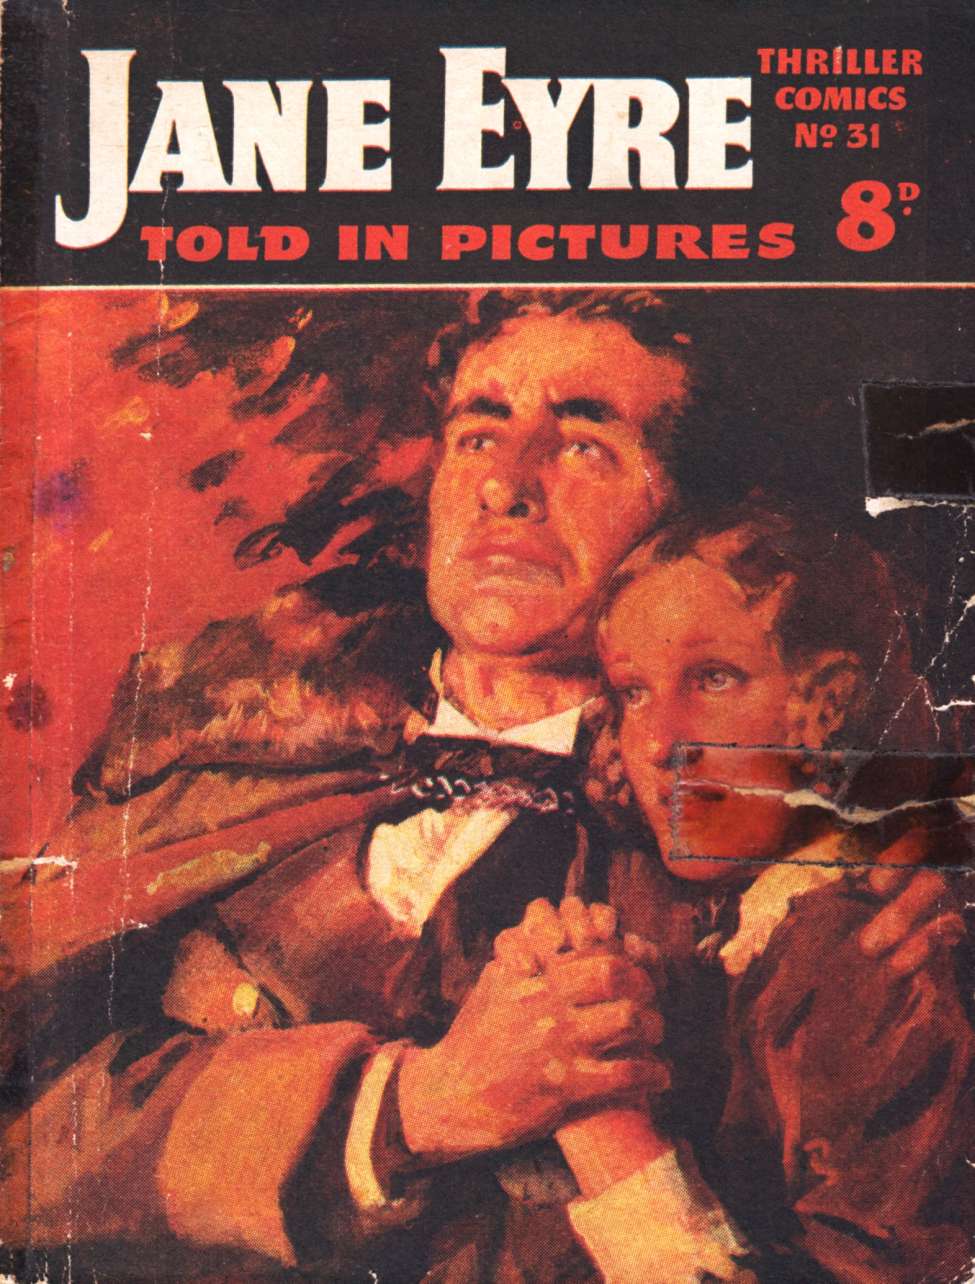 Book Cover For Thriller Comics 31 - Jane Eyre